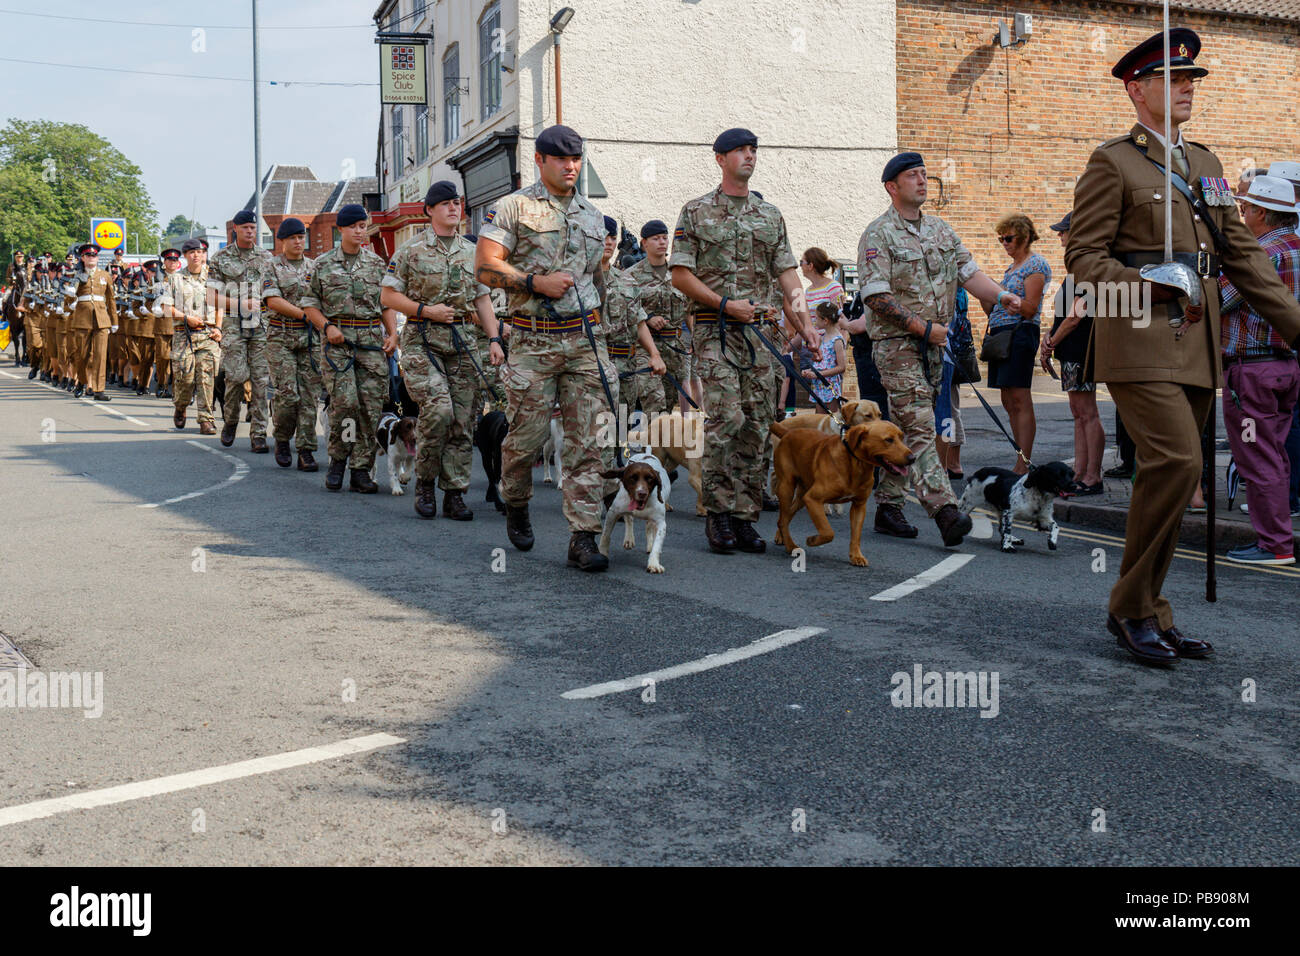 Melton Mowbray, Leicestershire,England, UK. 27th July 2018. The Royal Army Veterinary Corps (RAVC) parading through the market town. This year marks the centenary of the corps, 1918 to 2018. Stock Photo